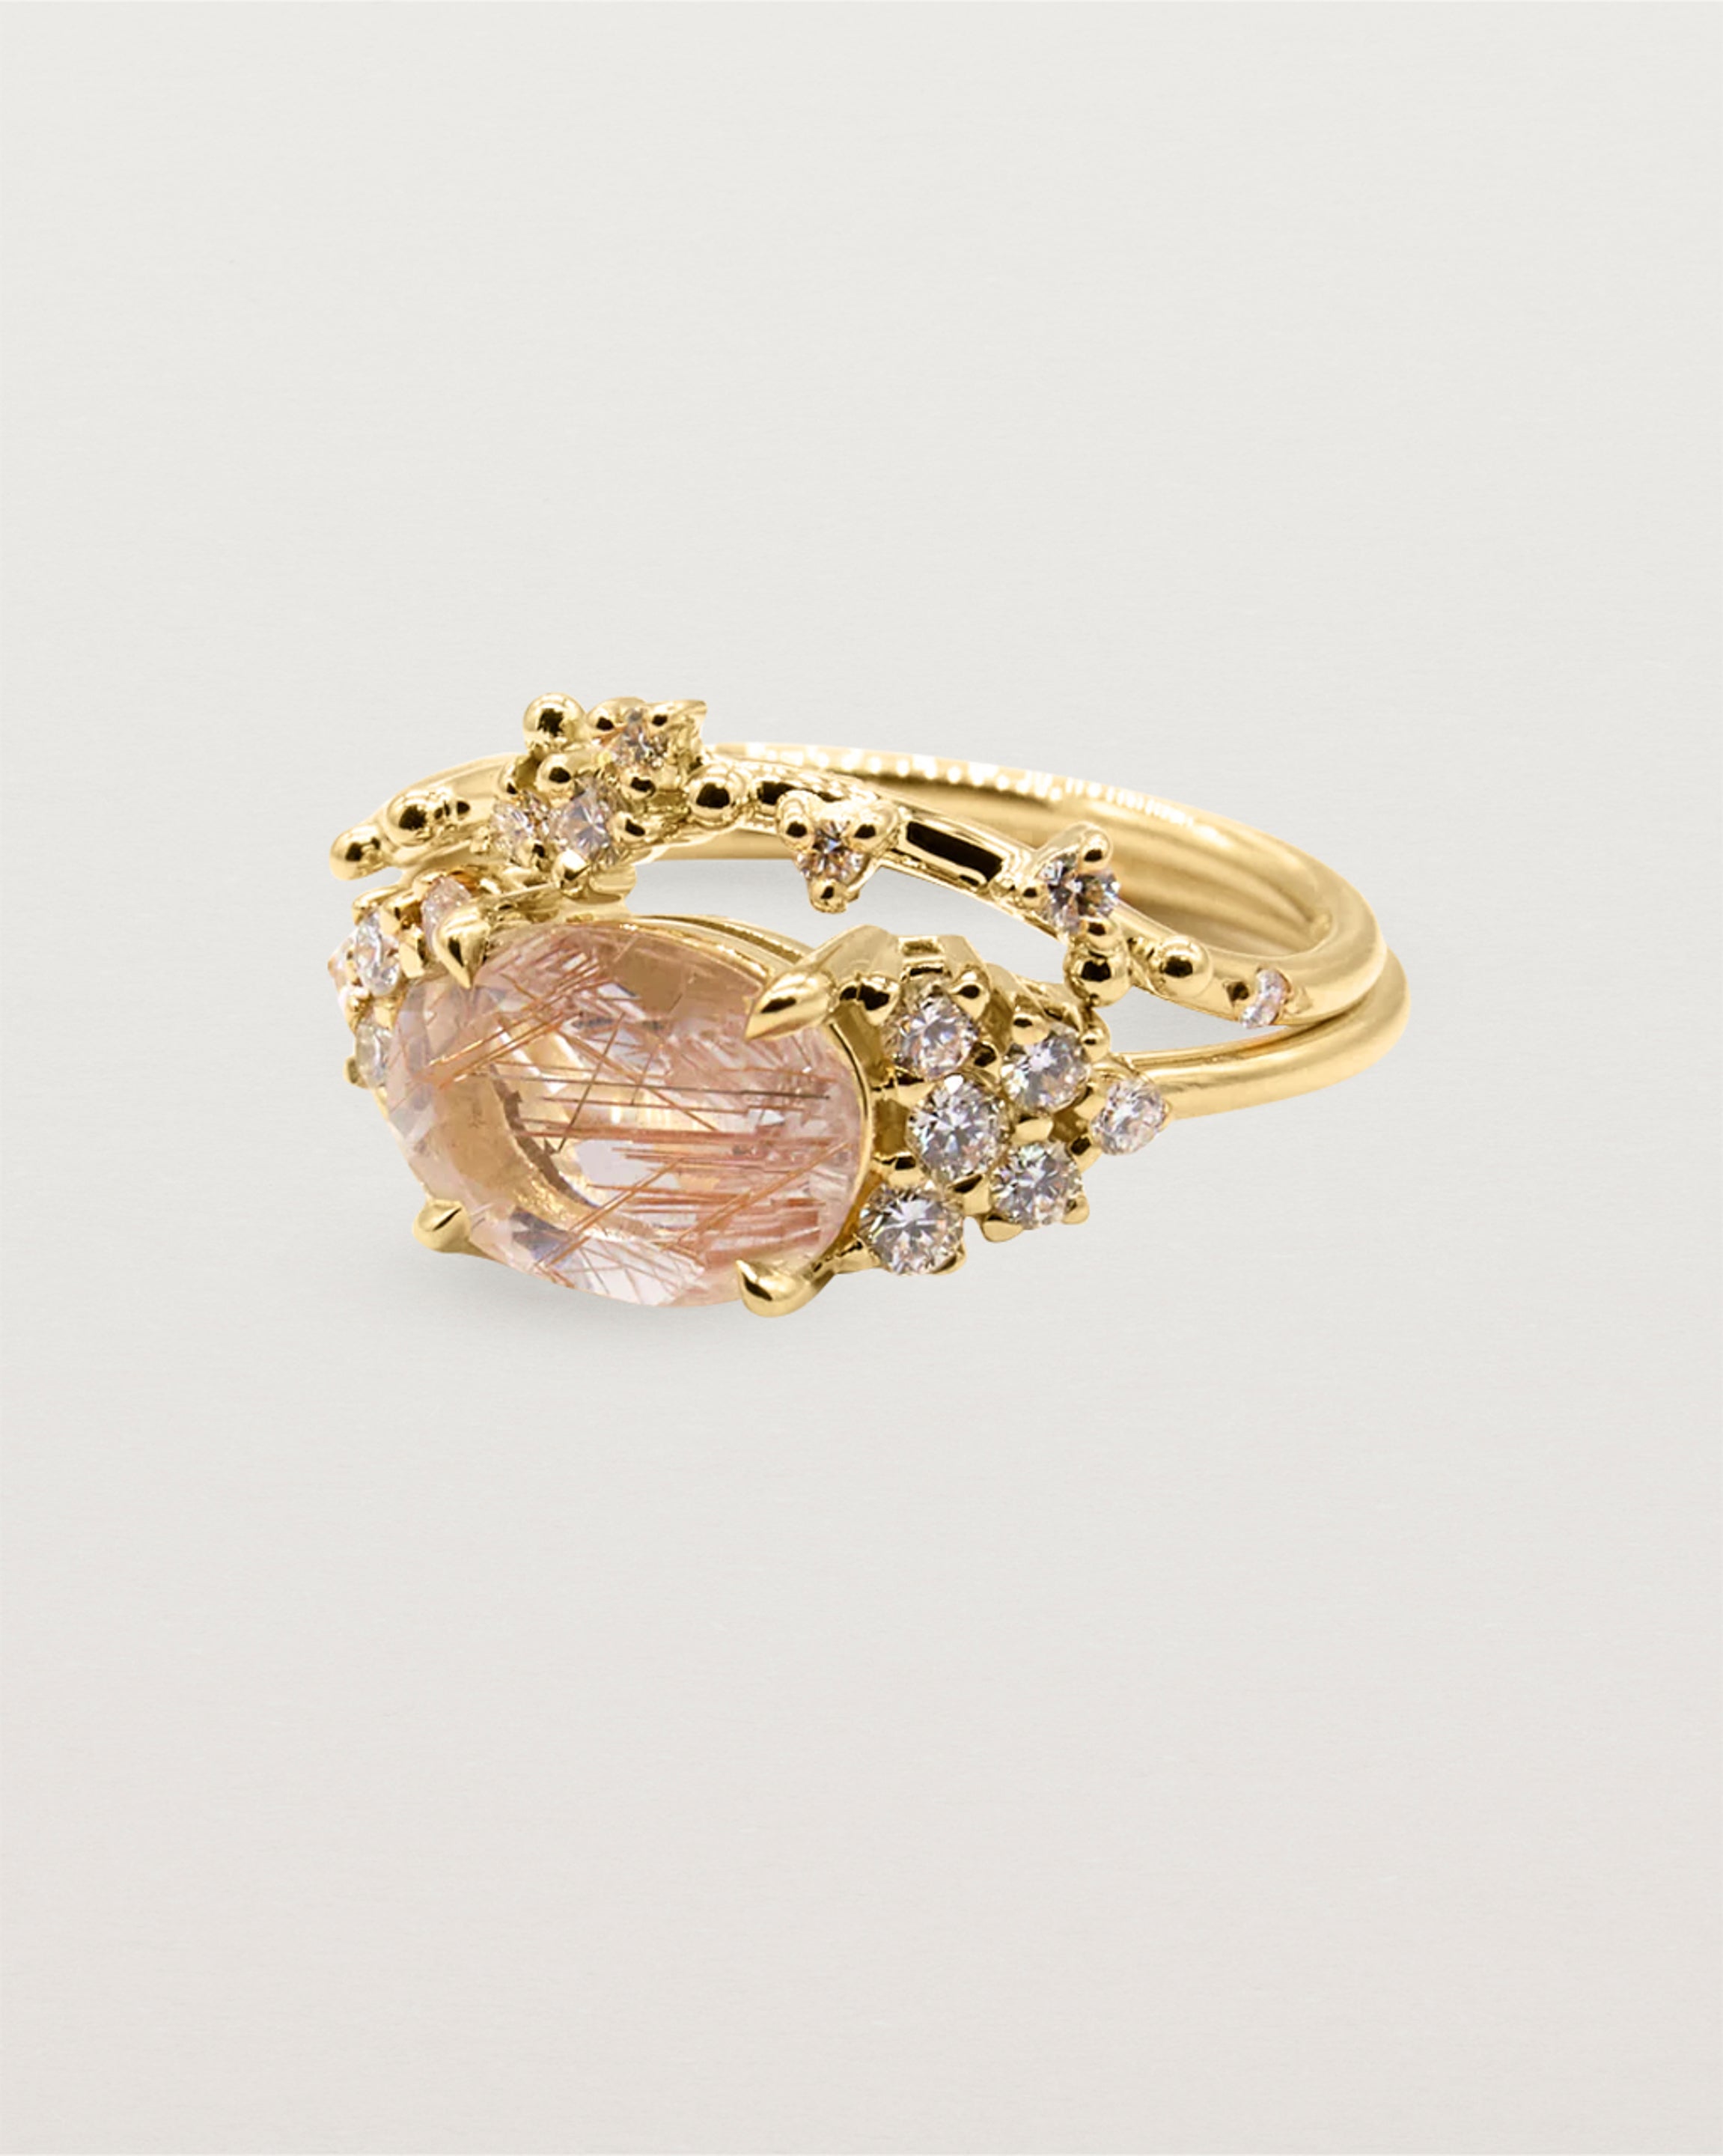 A bespoke gentle arc band feature a unique cluster of diamonds crafted in yellow gold and stacked with a rutilated quartz trio ring